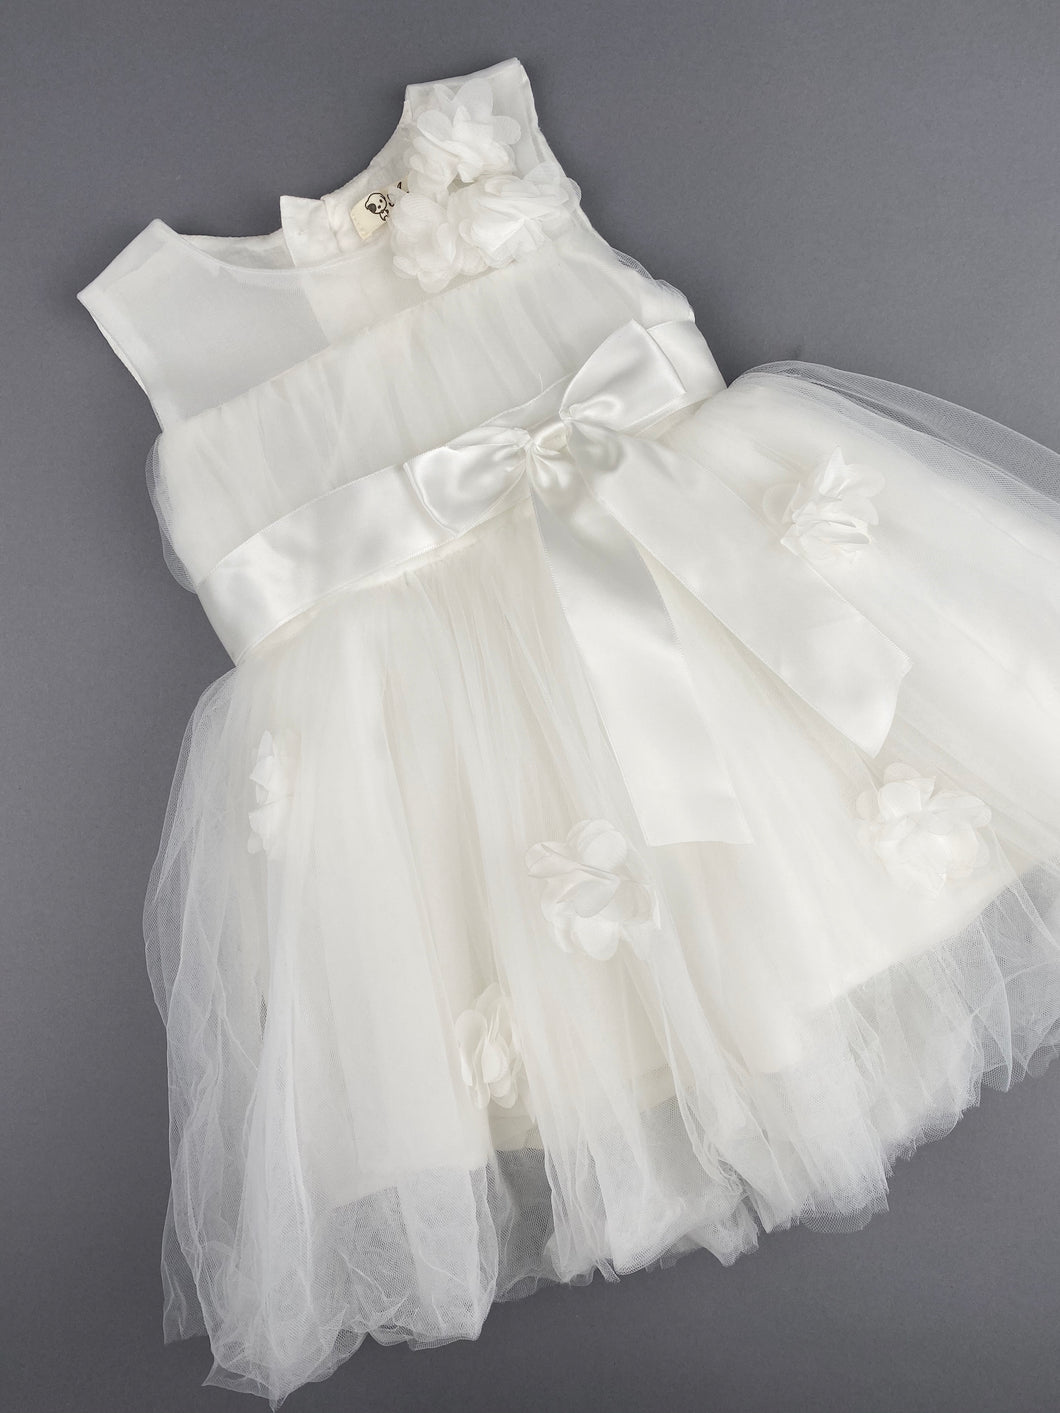 Girls Christening Baptismal Dress 48Tulle Top and Flowers